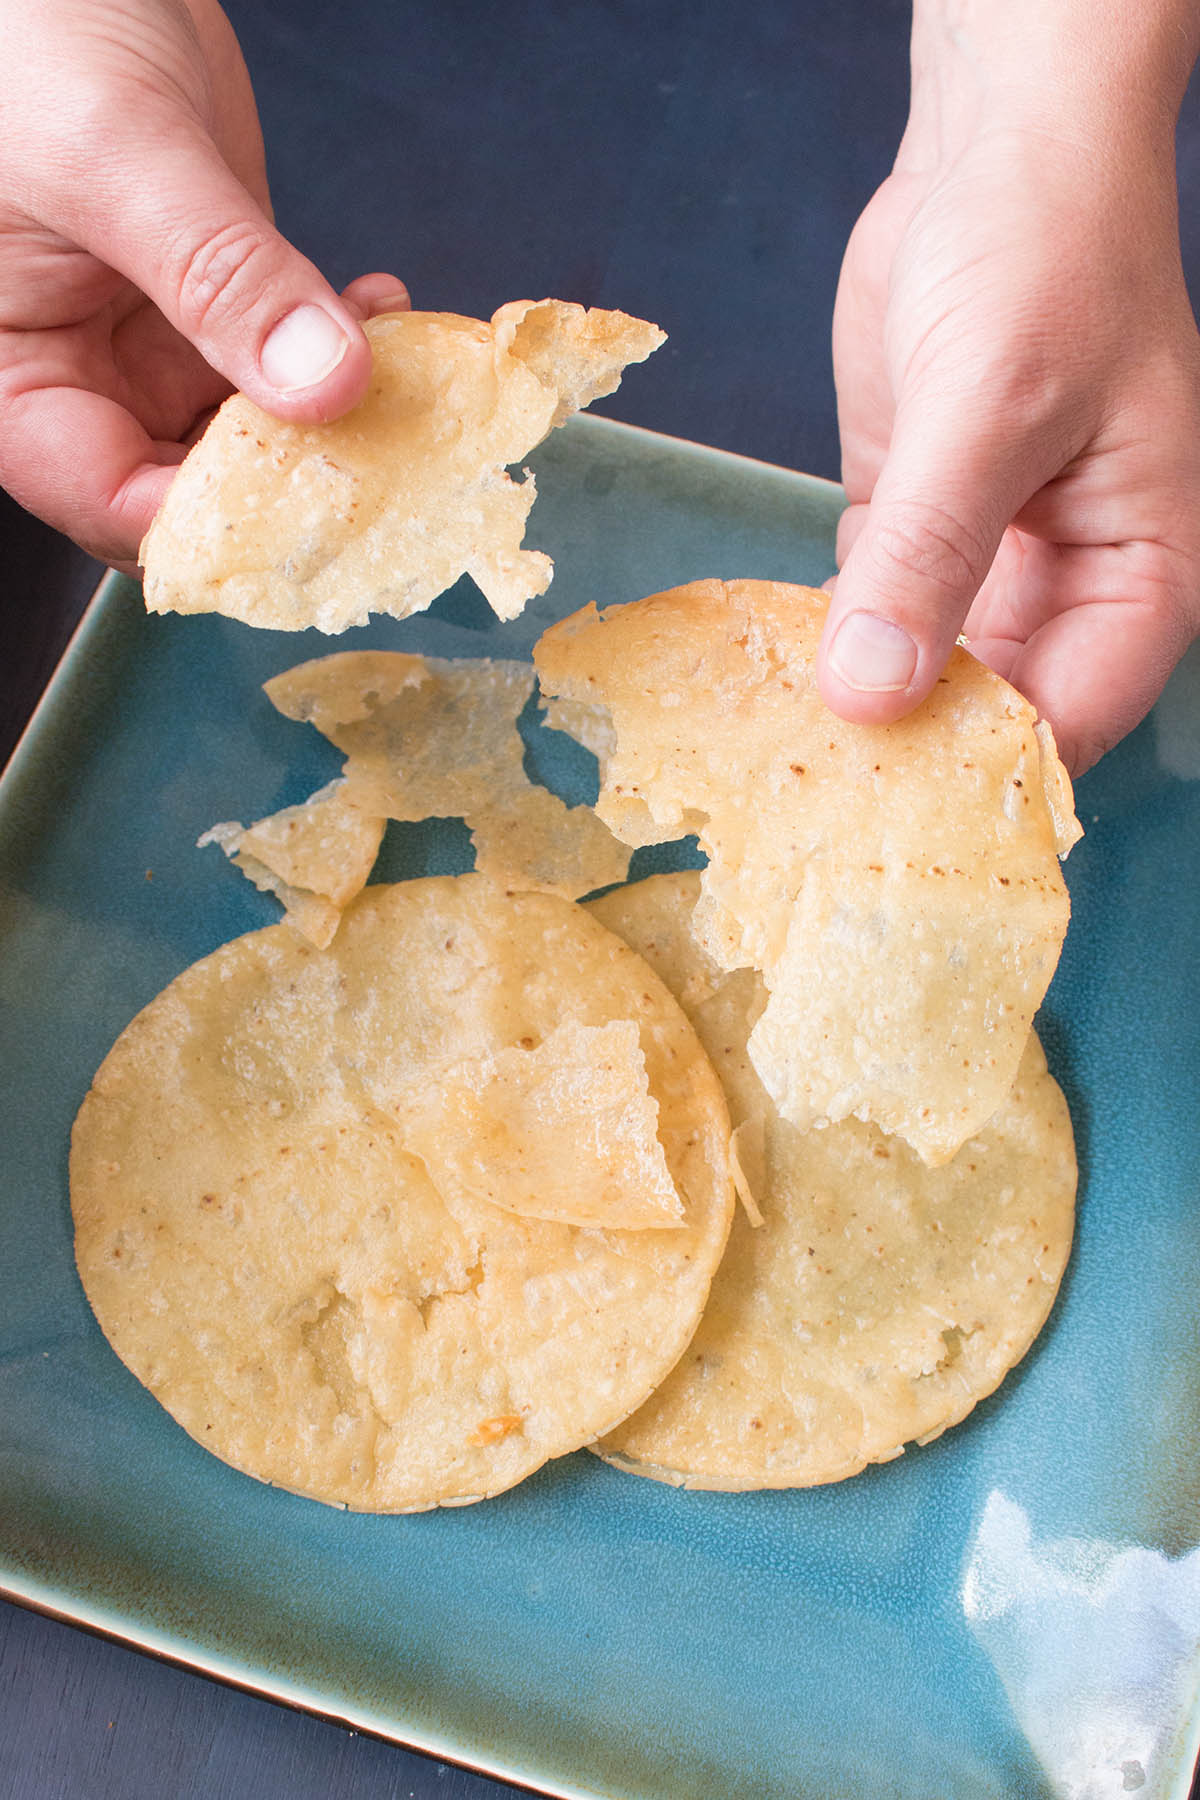 How to Make Homemade Crispy Tortilla Chips - Chili Pepper Madness